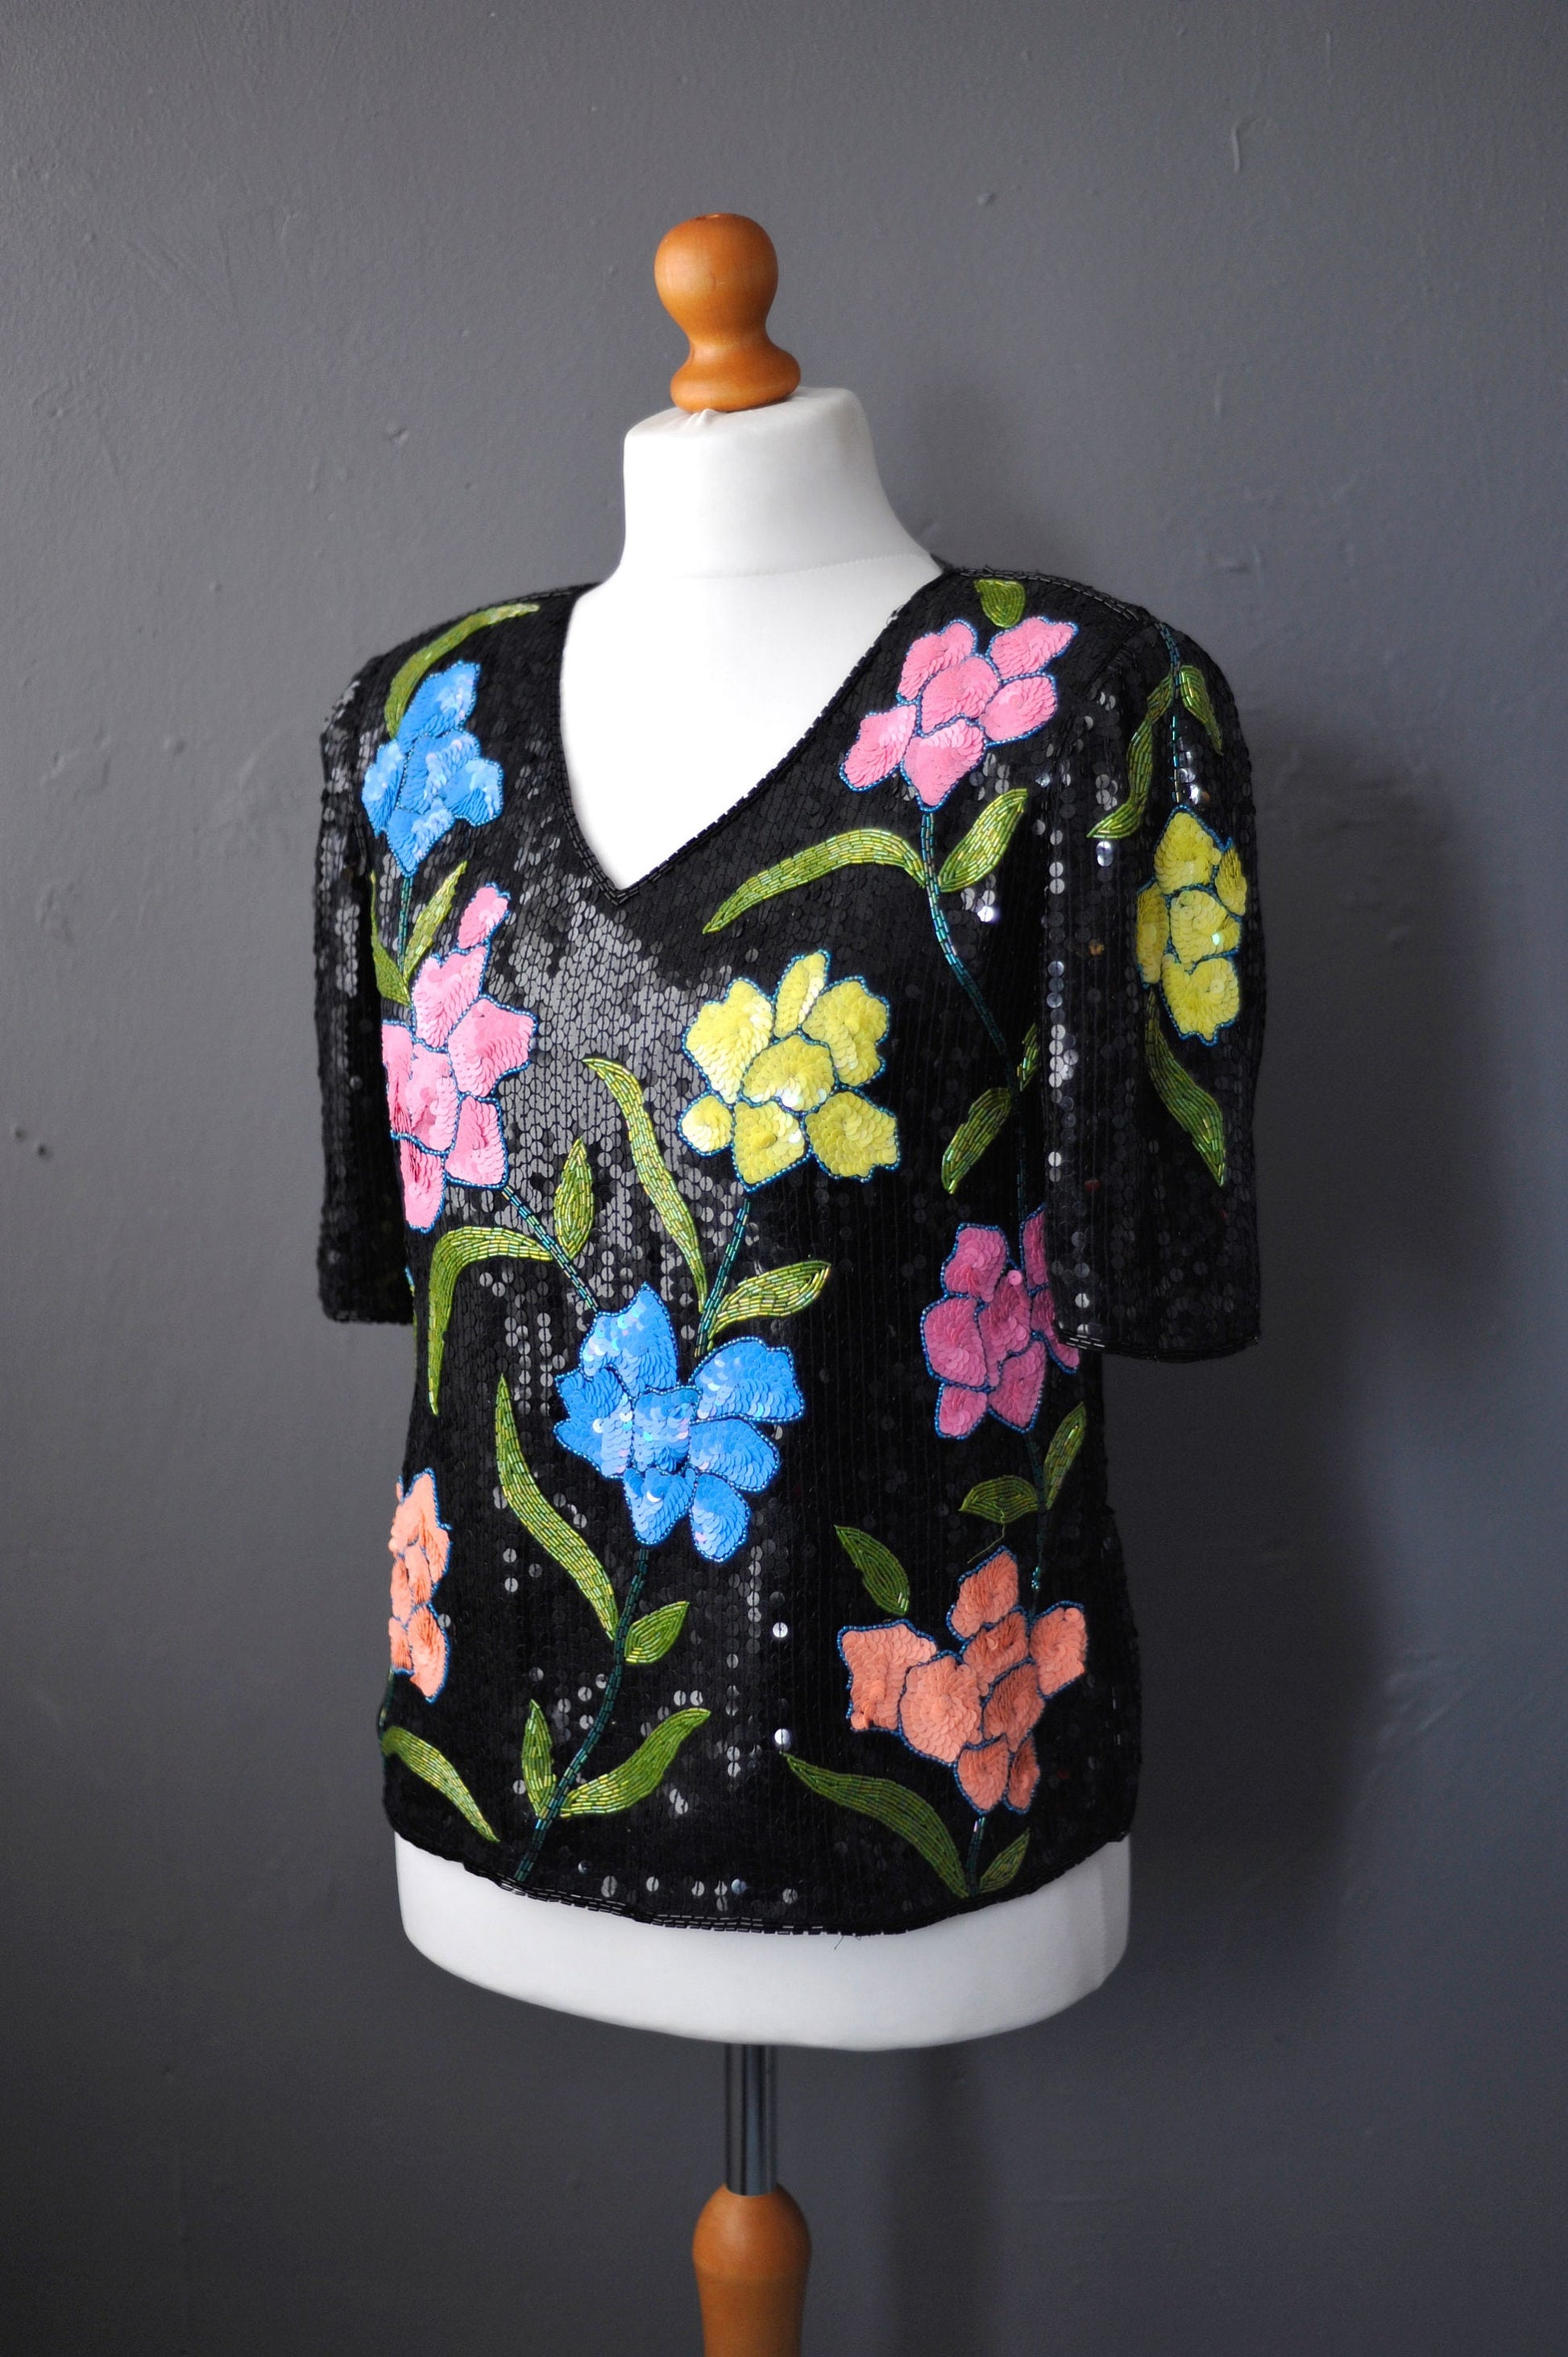 80s Sequin Silk Top by Tricoville, Size Medium